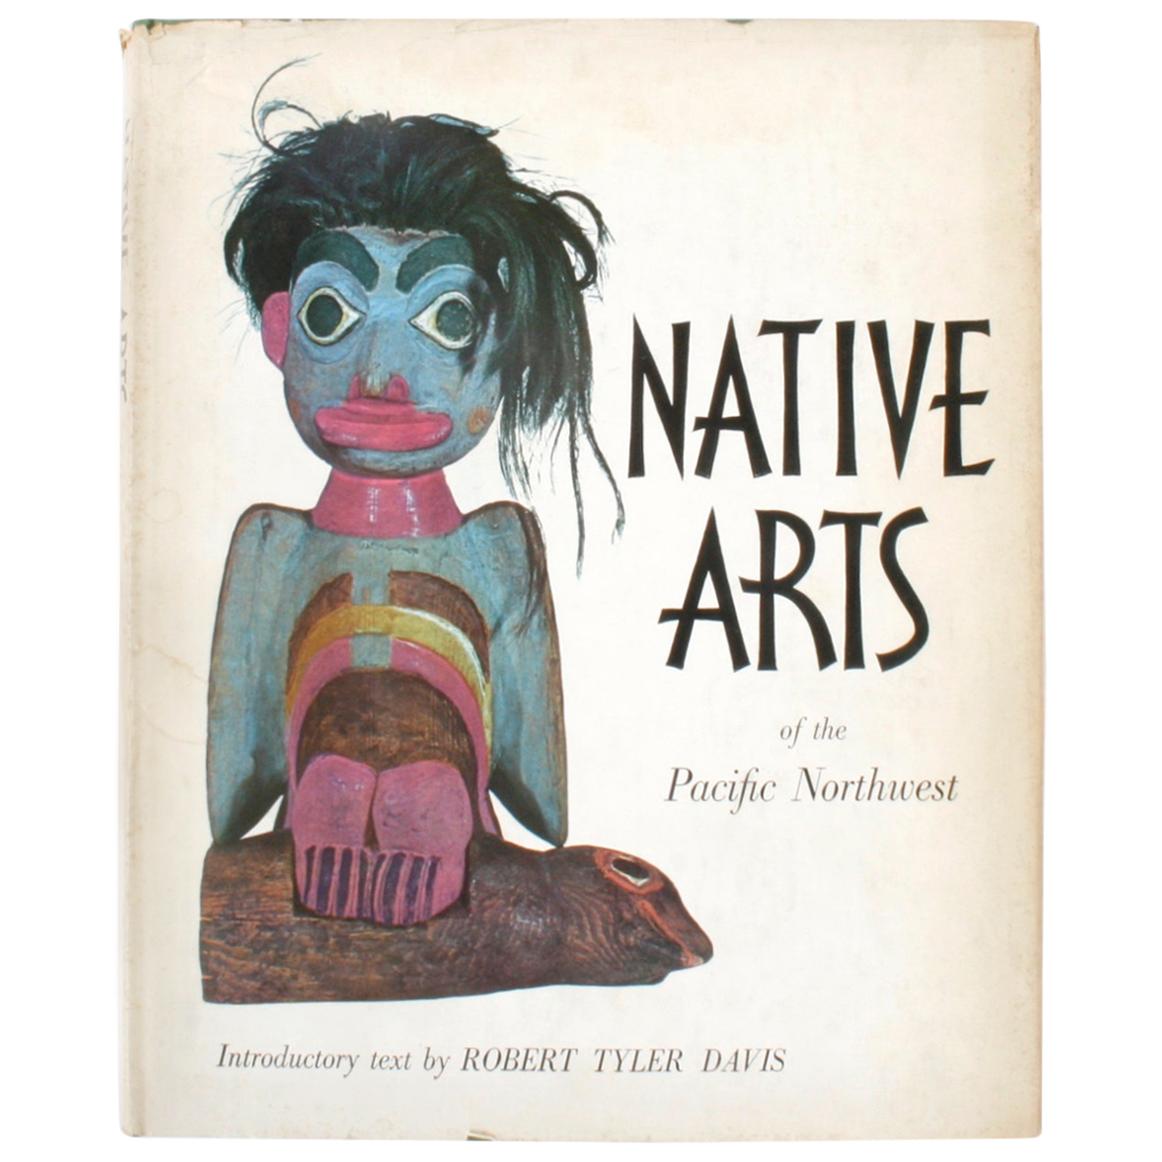 "Native Arts of the Pacific Northwest" Book from the Portland Museum of Art